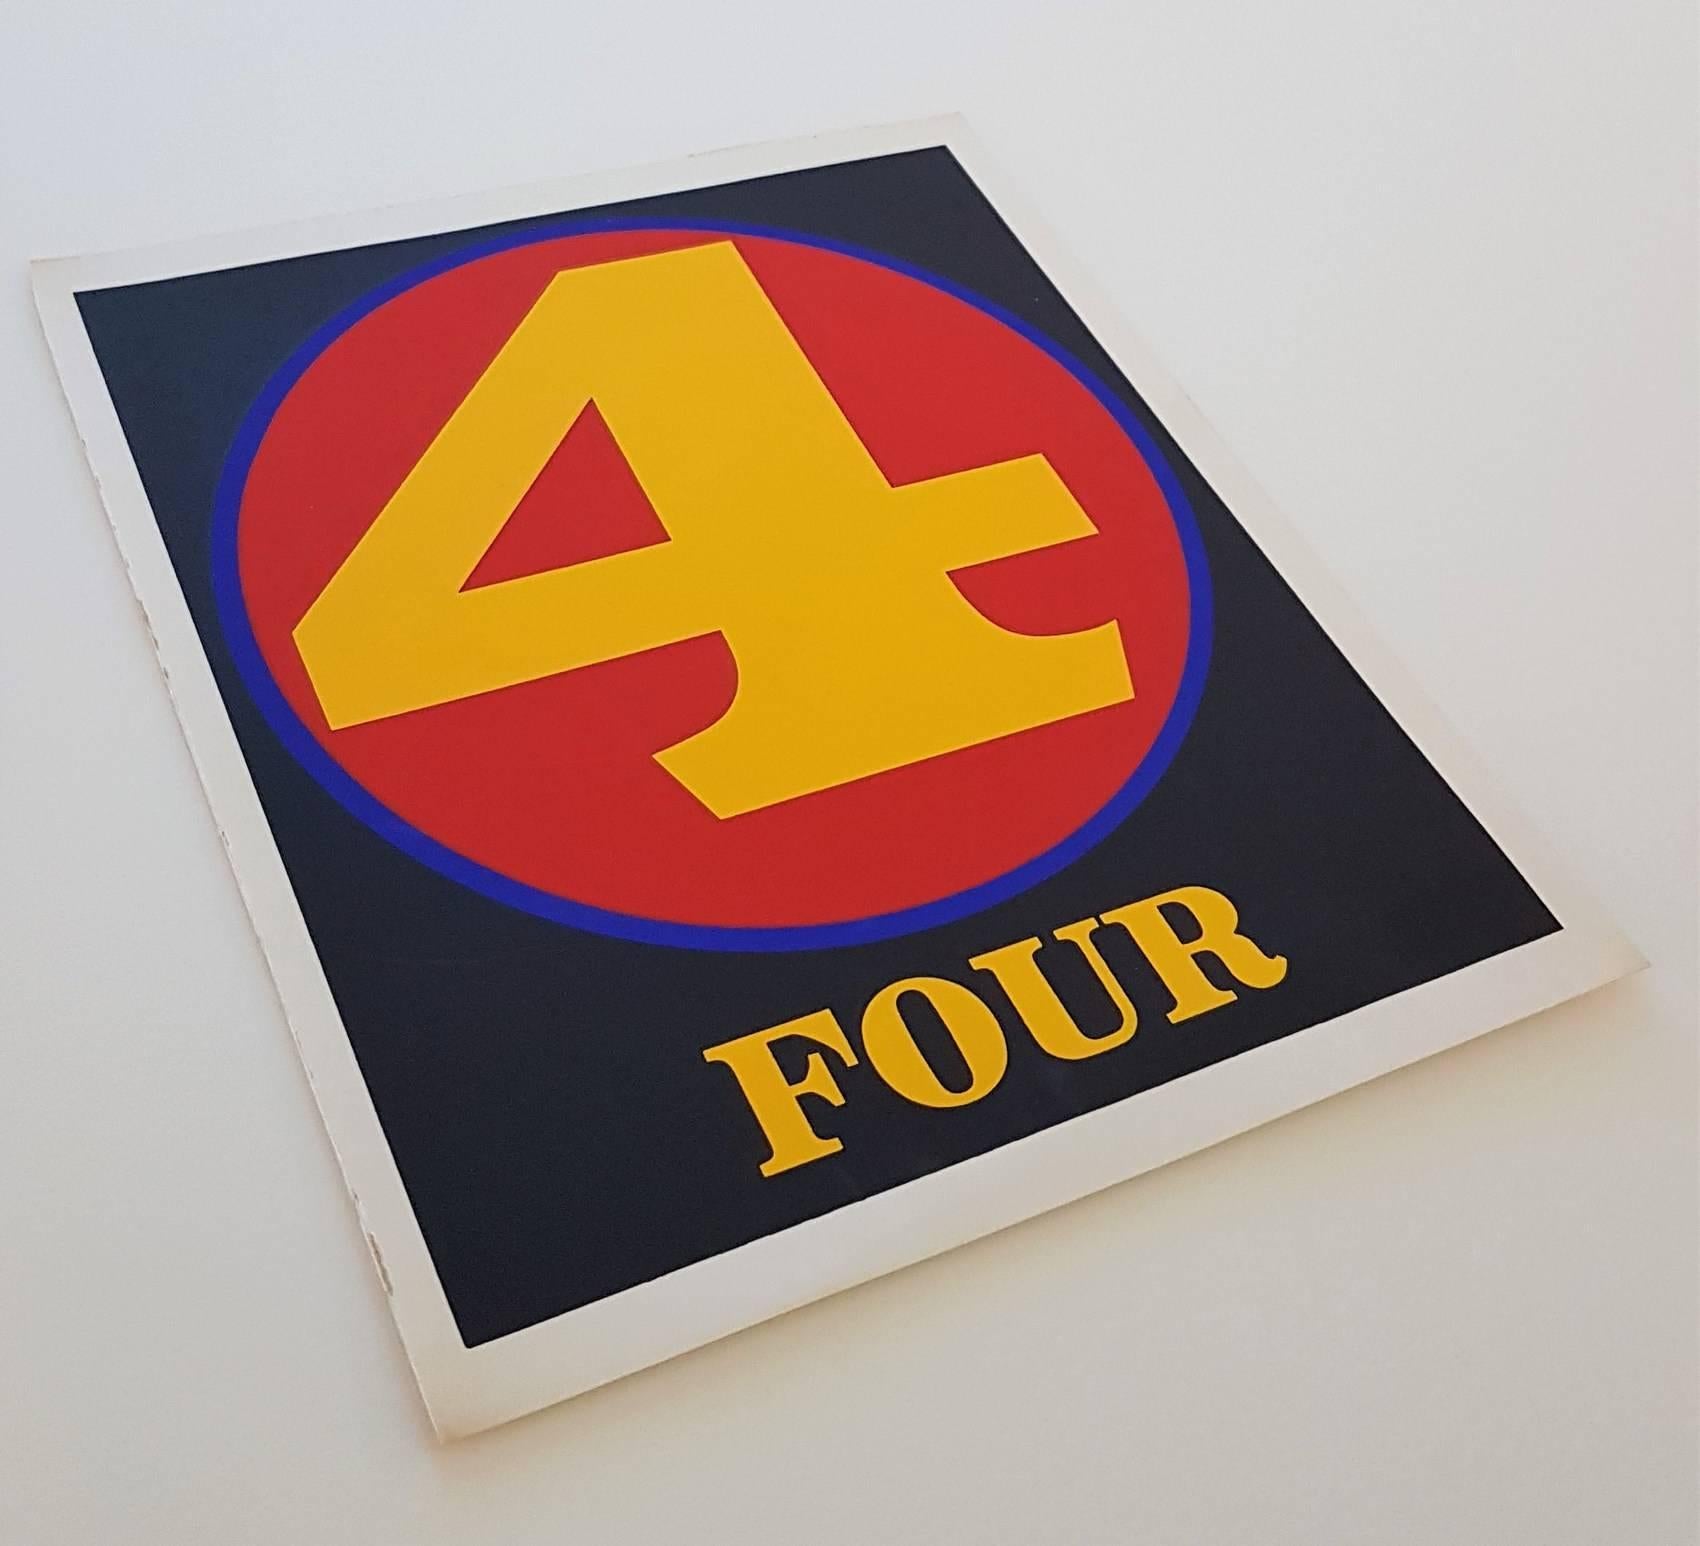 Number Suite - Four - Print by Robert Indiana